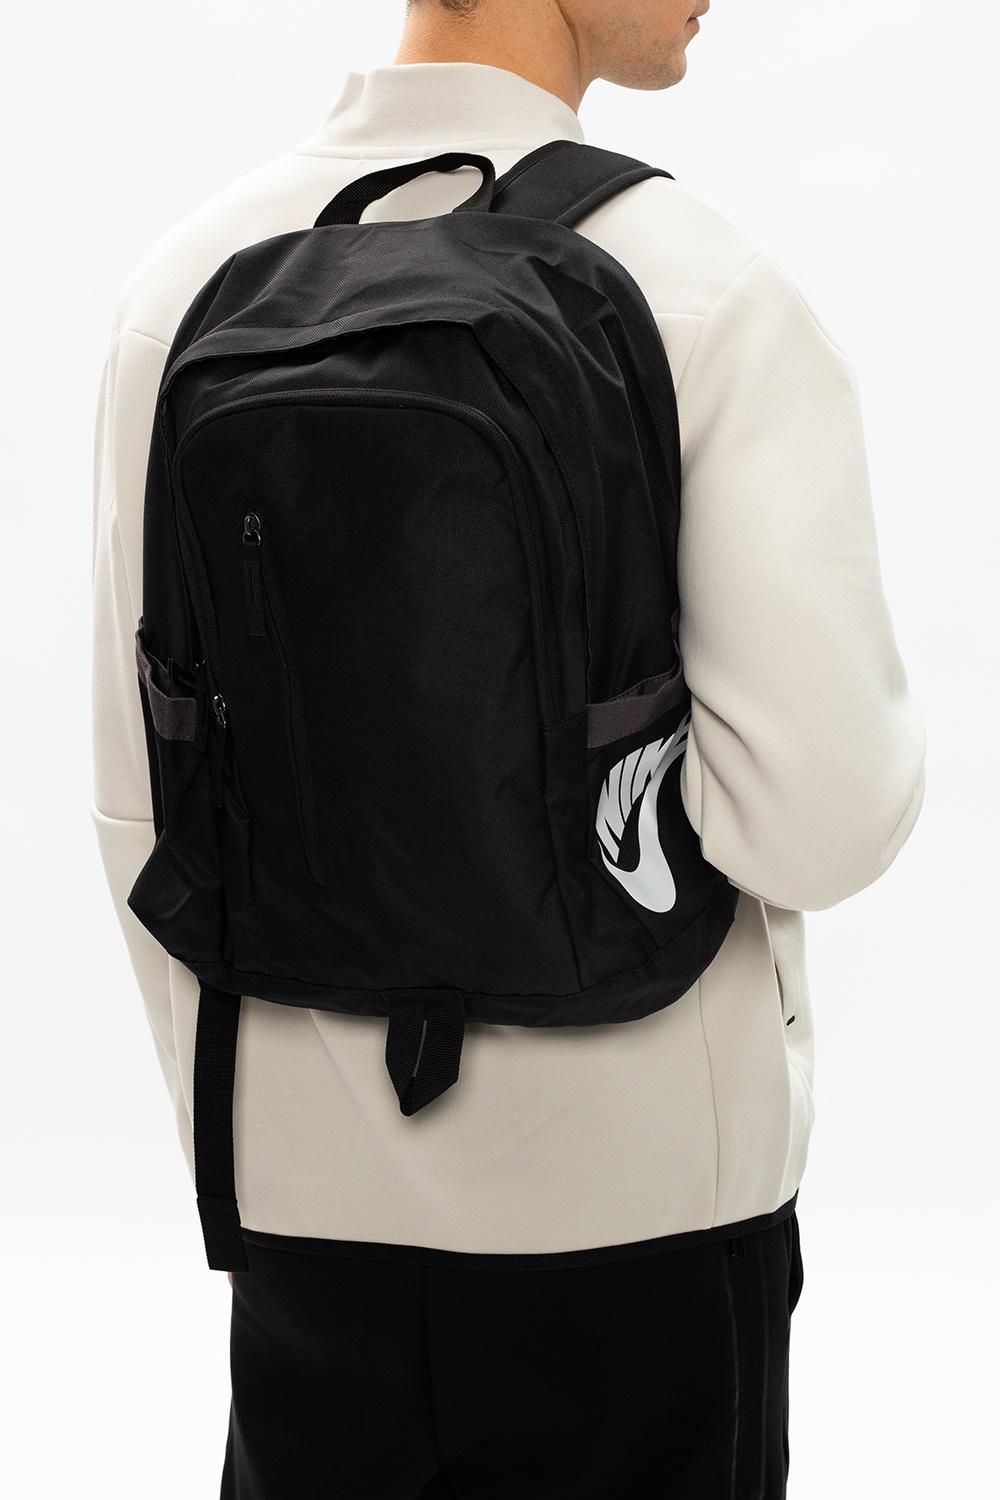 Nike All Access Soleday Backpack Greece, SAVE 44% -  kennethinstallations.co.uk